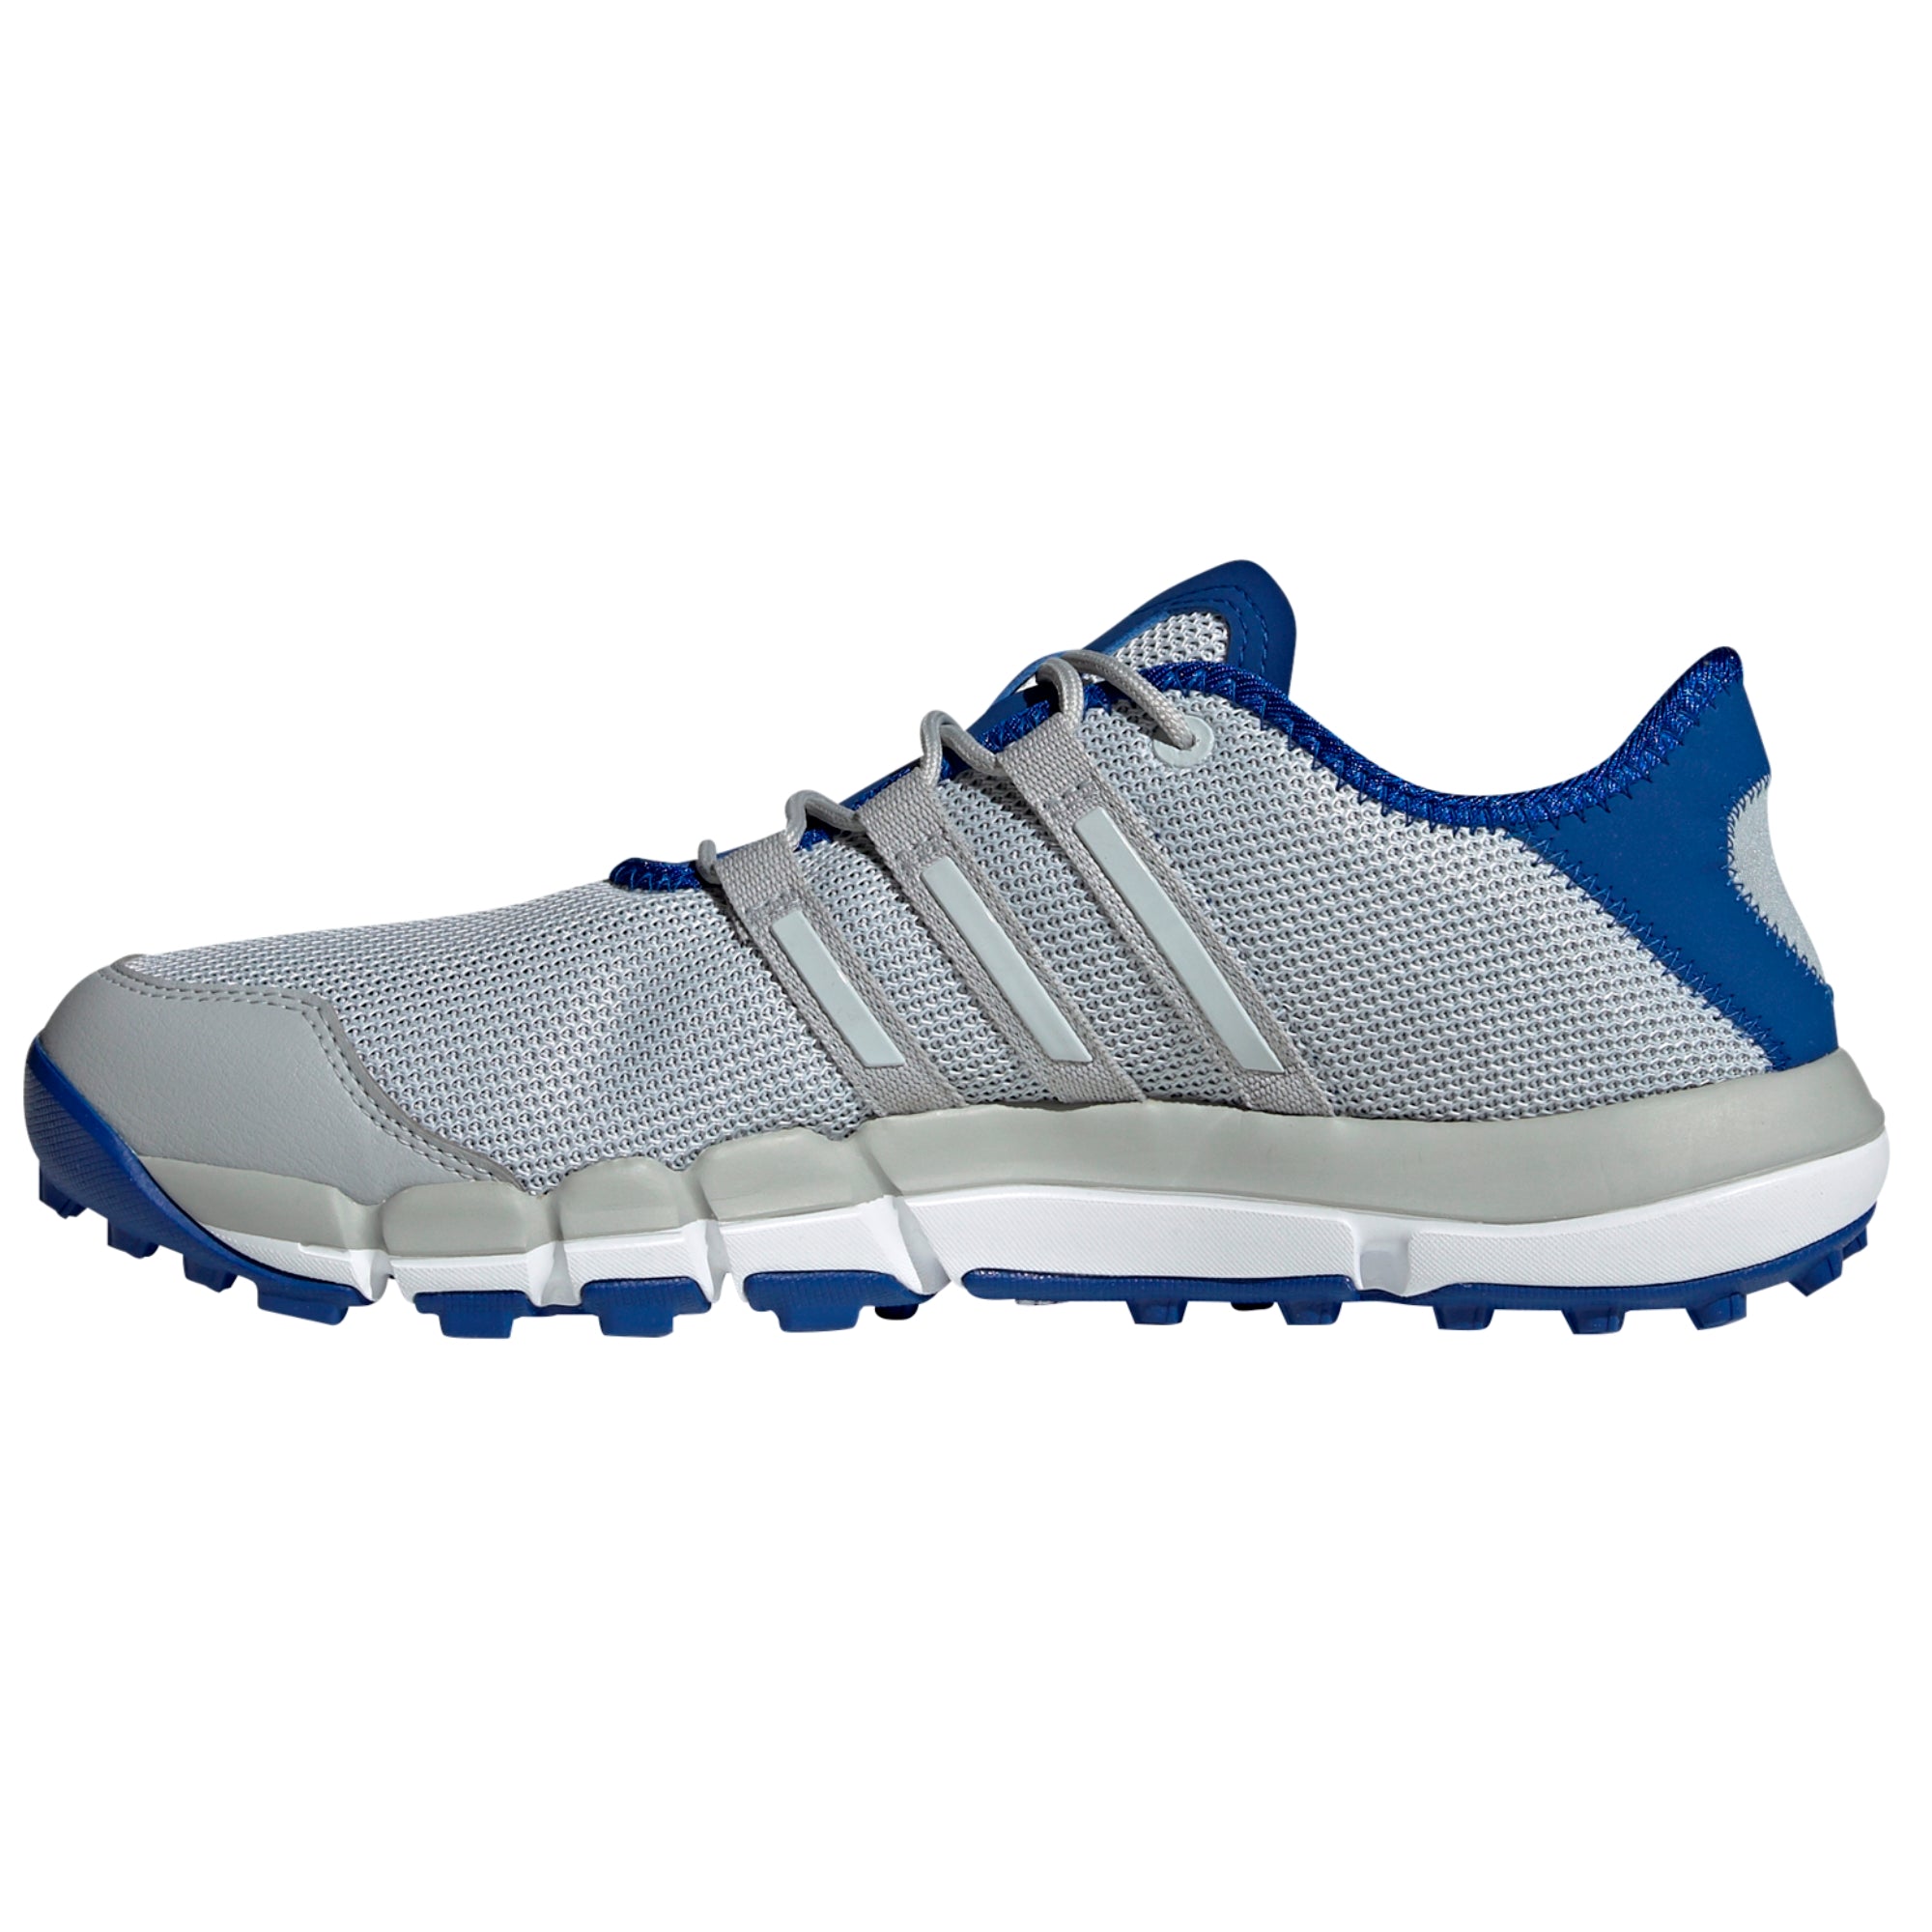 adidas ClimaCool ST Golf Shoes F33525 